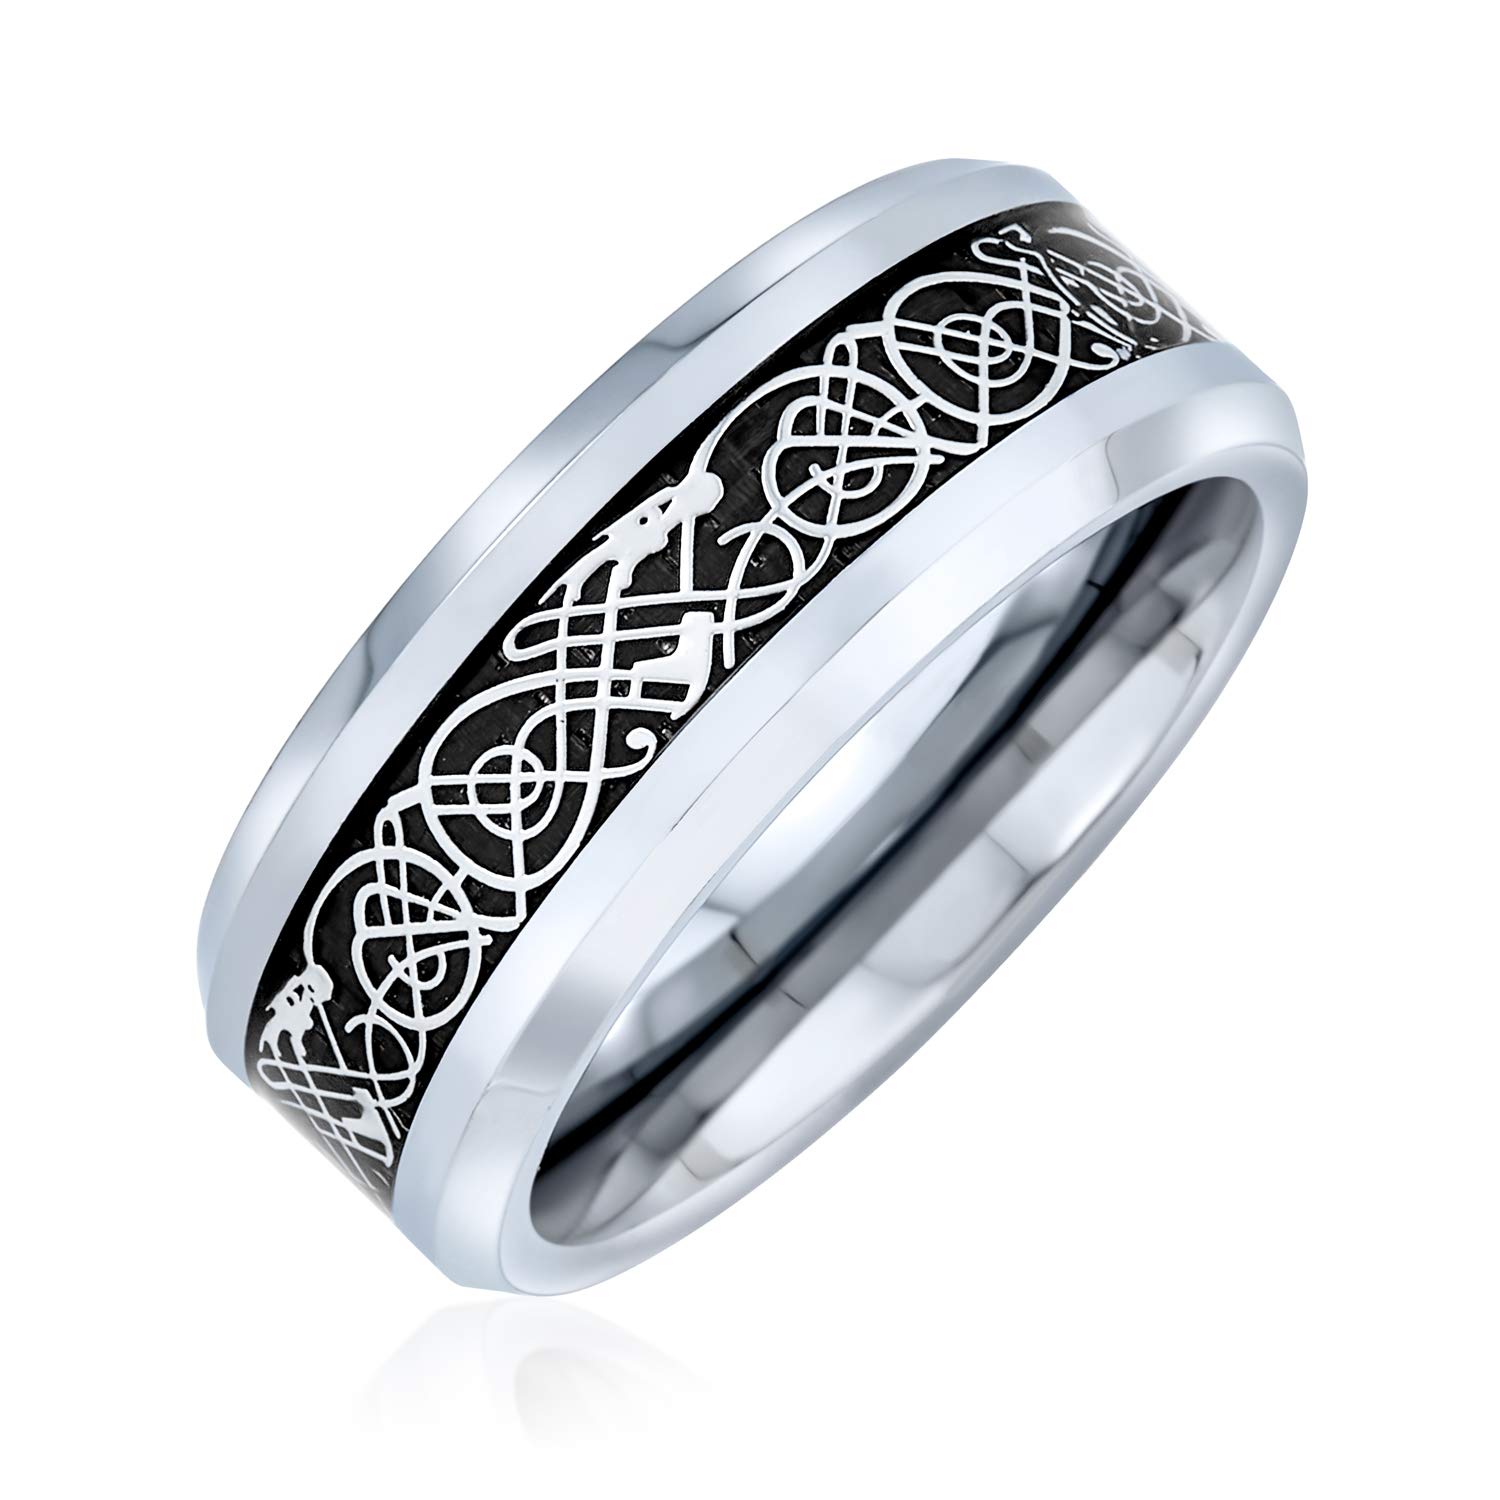 Bling Jewelry Personalize Two Tone Celtic Knot Dragon Carbon Fiber Inlay Couples Silver Gold Tones Titanium Wedding Band Rings for Men for Women Comfort Fit 8MM Wide in Blue Black Golden Colors